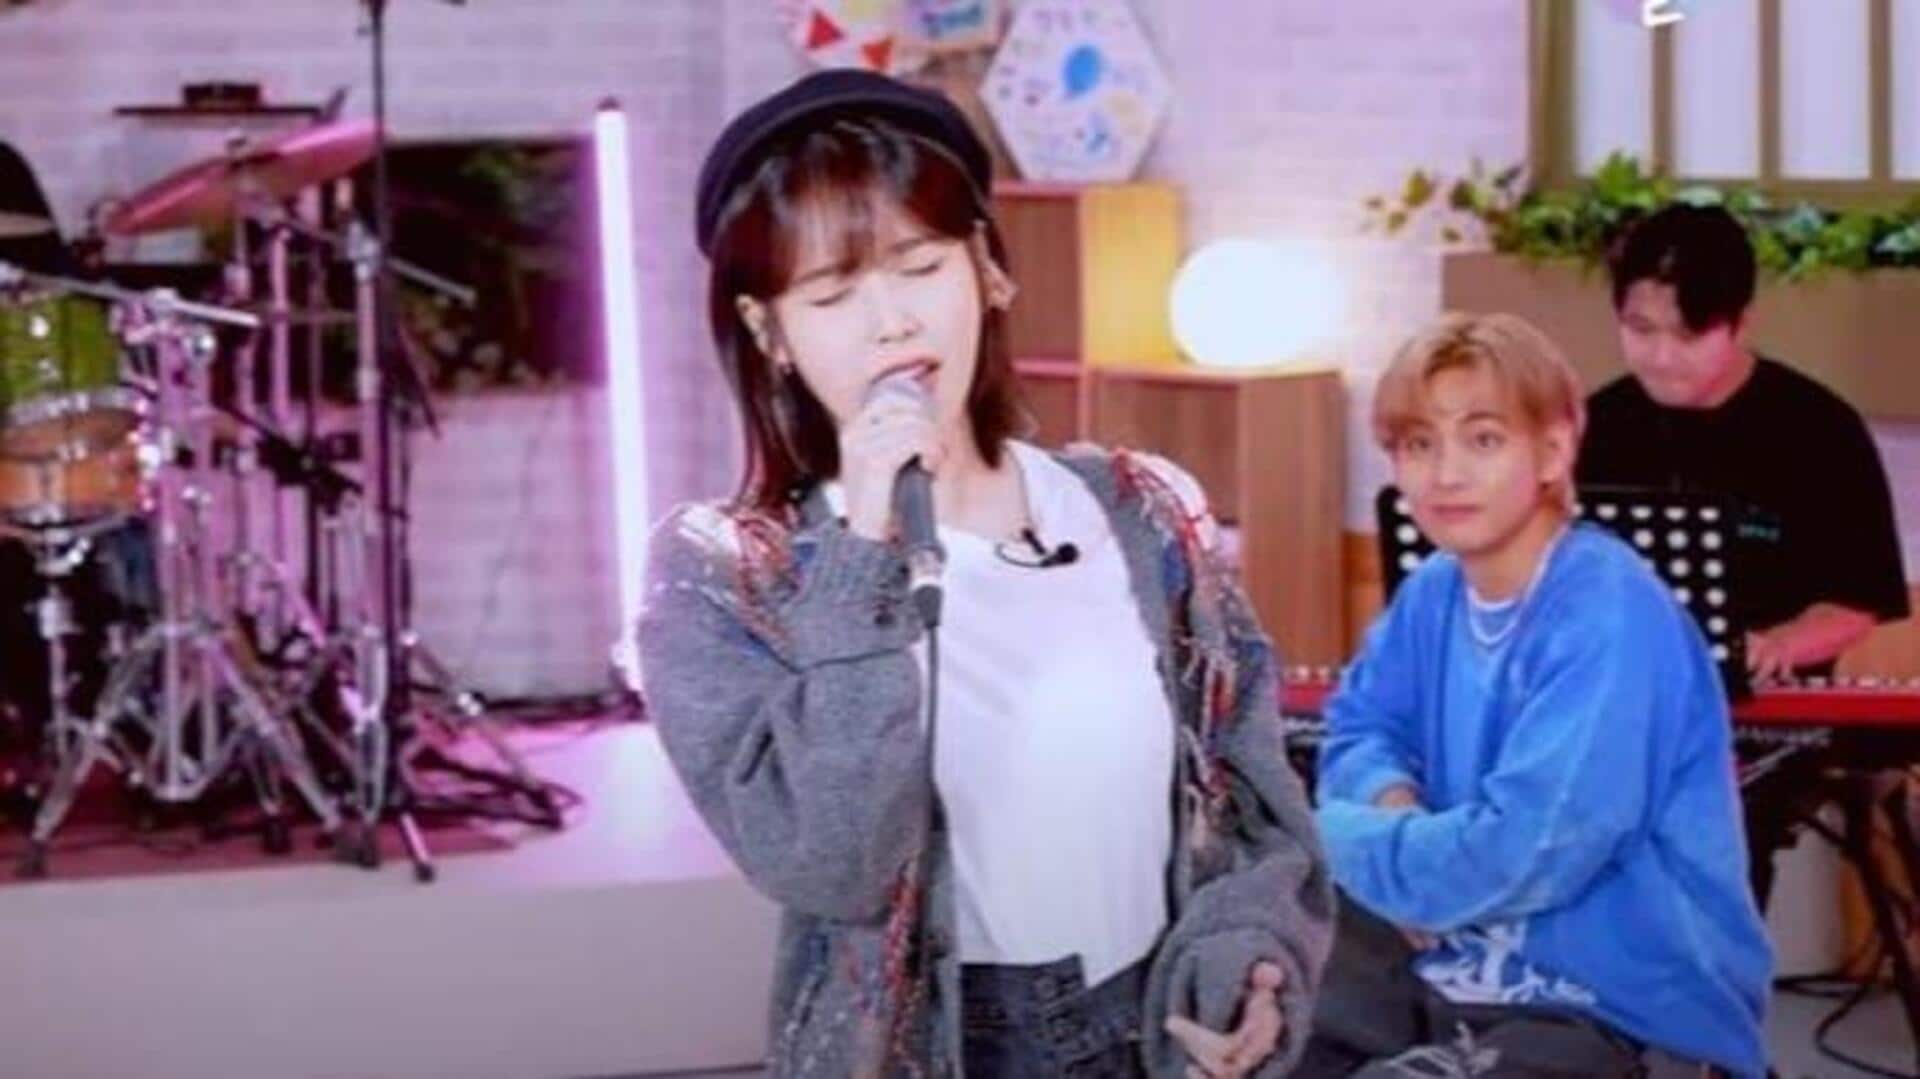 Confirmed! BTS's V to star in IU's upcoming music video